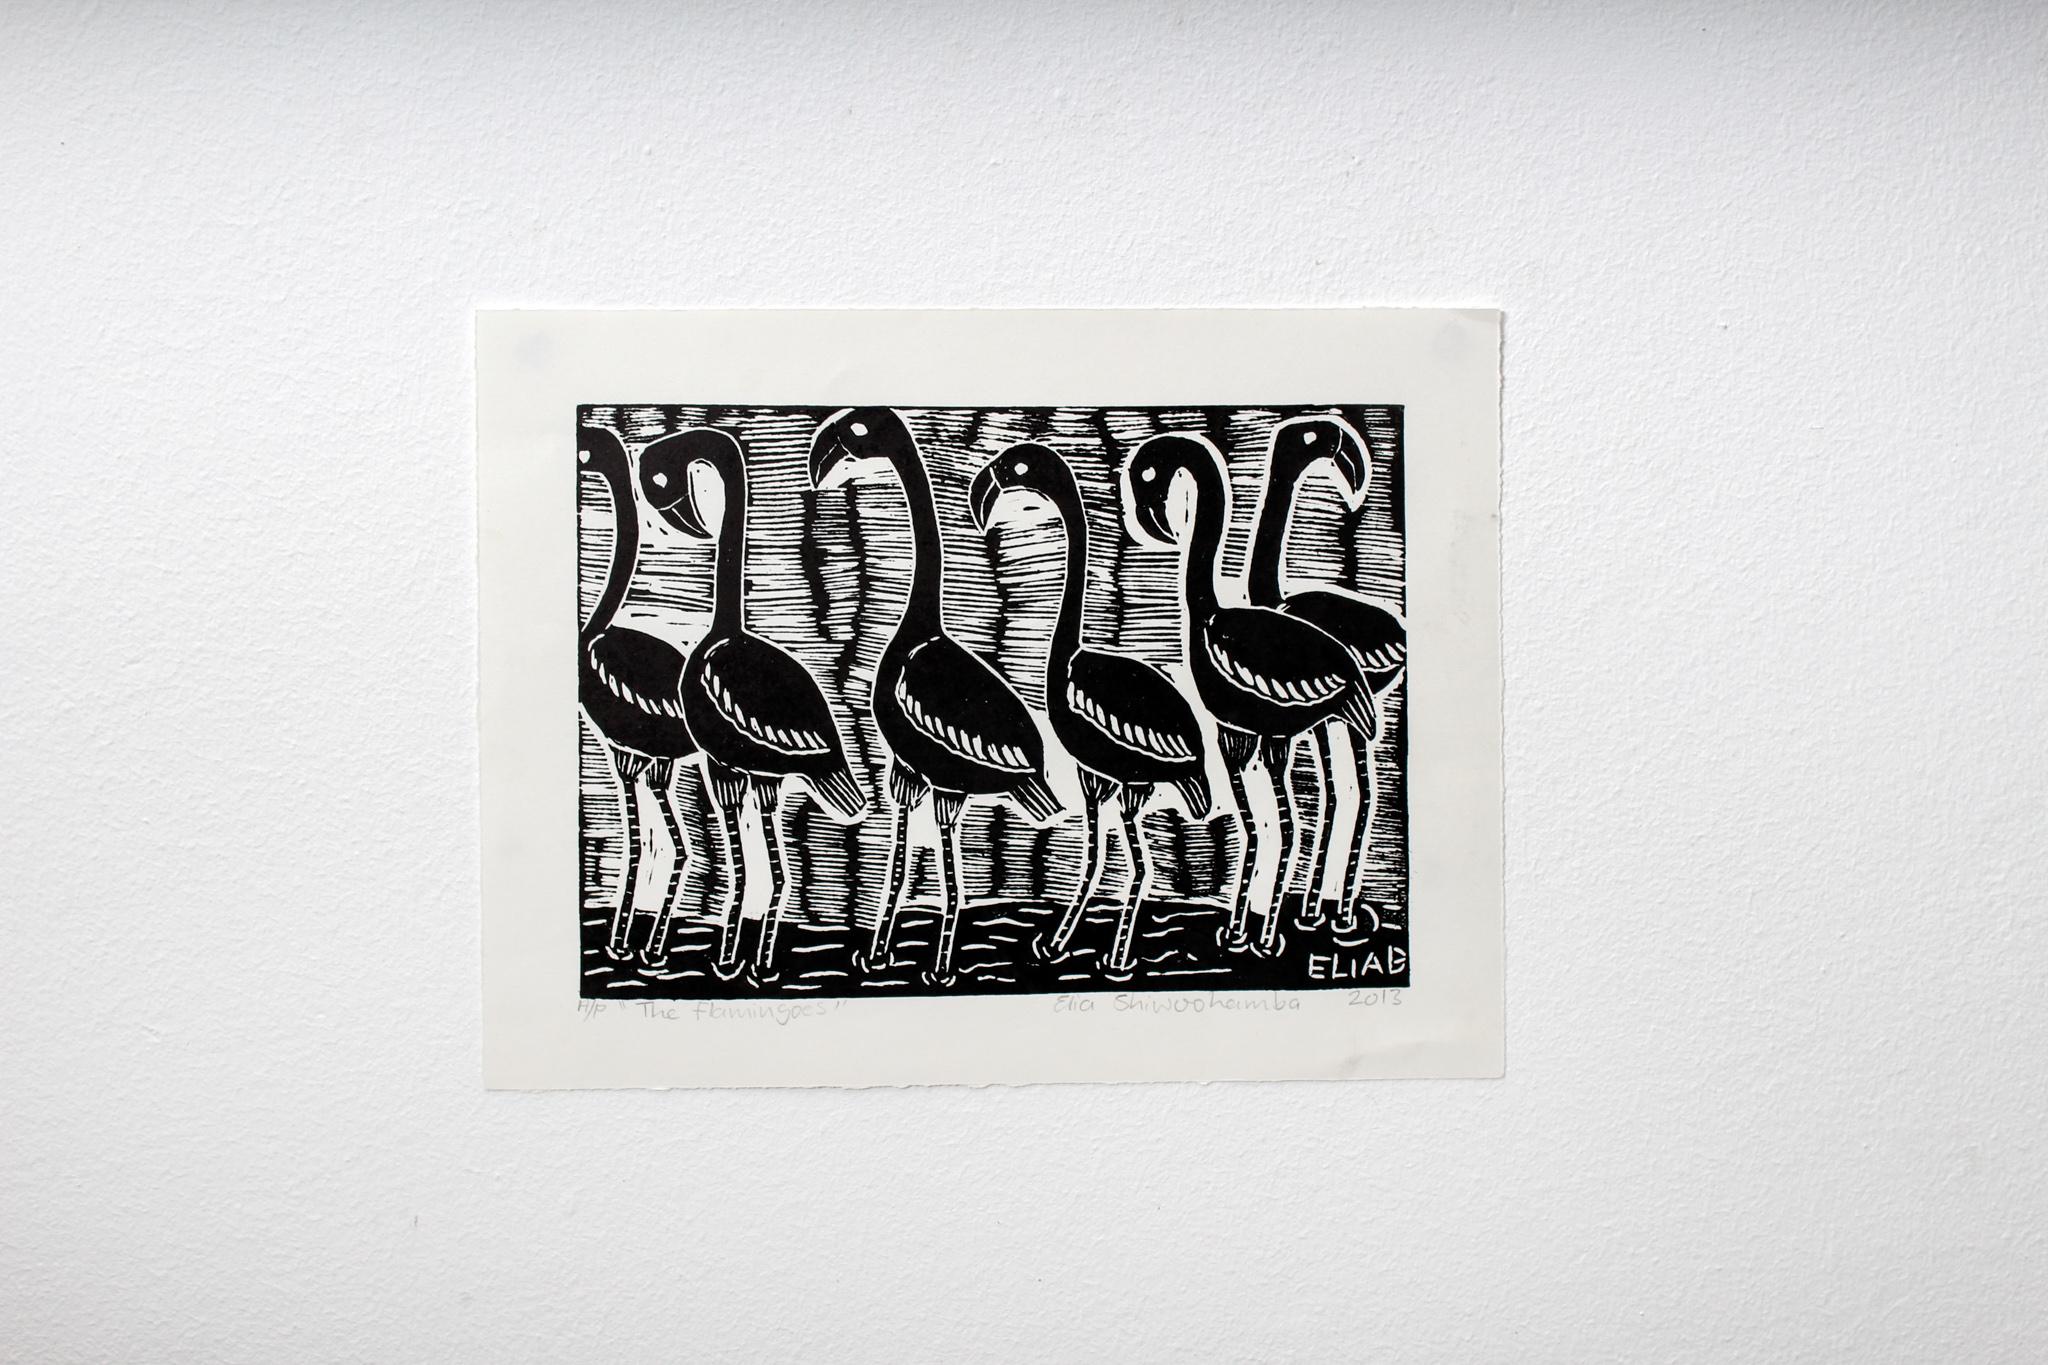 The flamingoes, Linoleum block prints on paper.

Elia Shiwoohamba was born in 1981 in Windhoek, Namibia. He graduated from the John Muafangejo Art Centre in Windhoek in 2006. Specialising in printmaking and sculpture, Shiwoohamba works as a